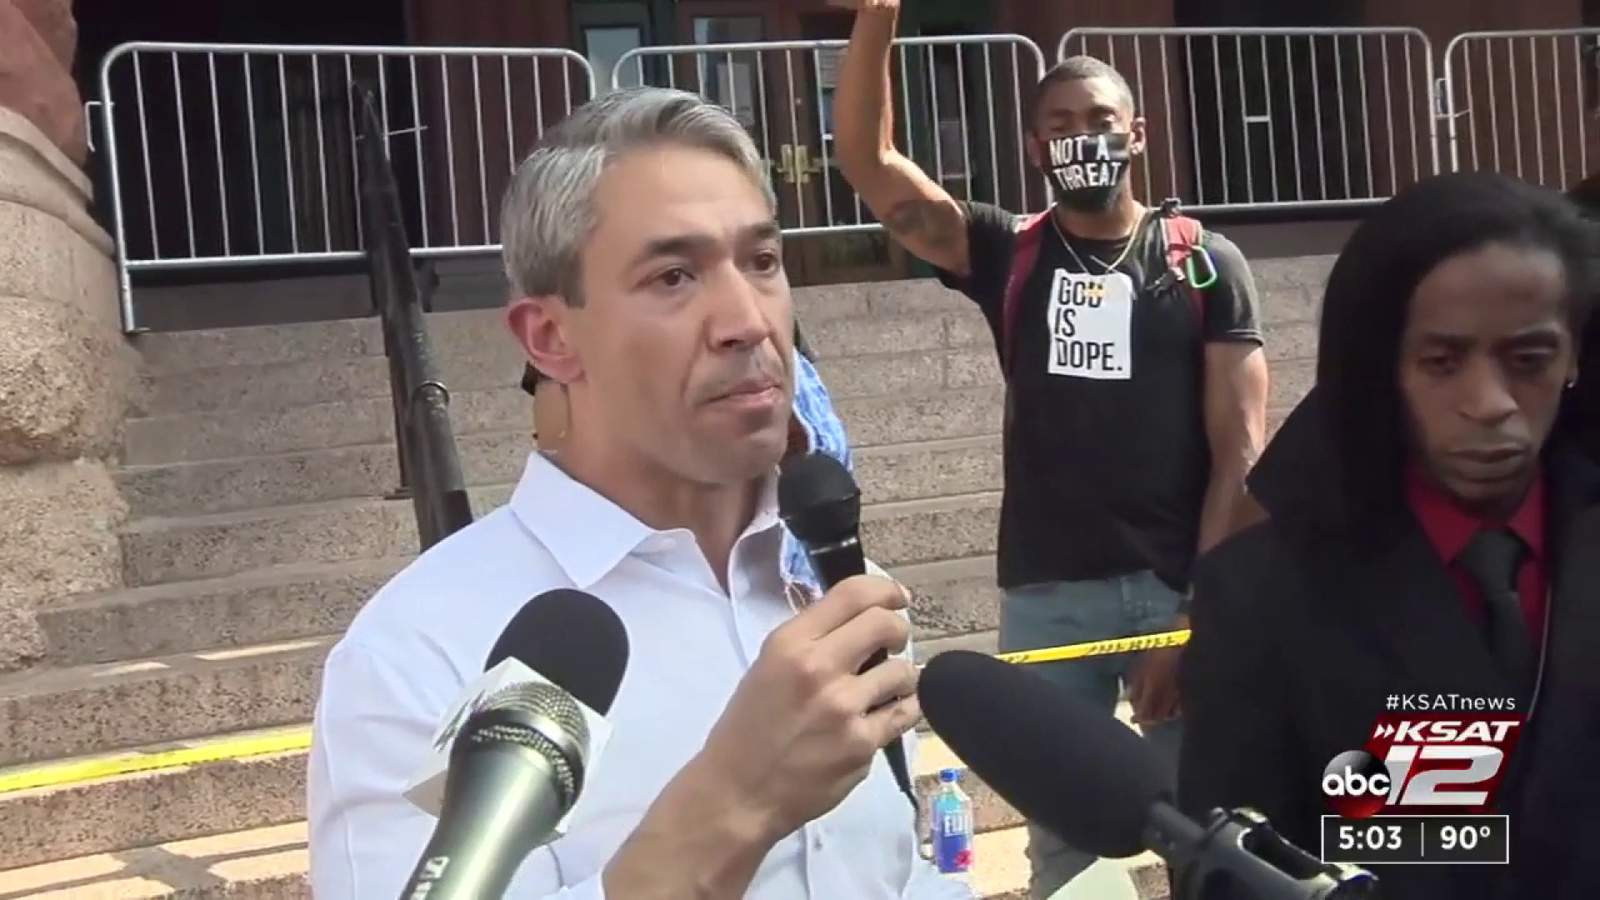 Mayor Ron Nirenberg talks about his "plans for change".